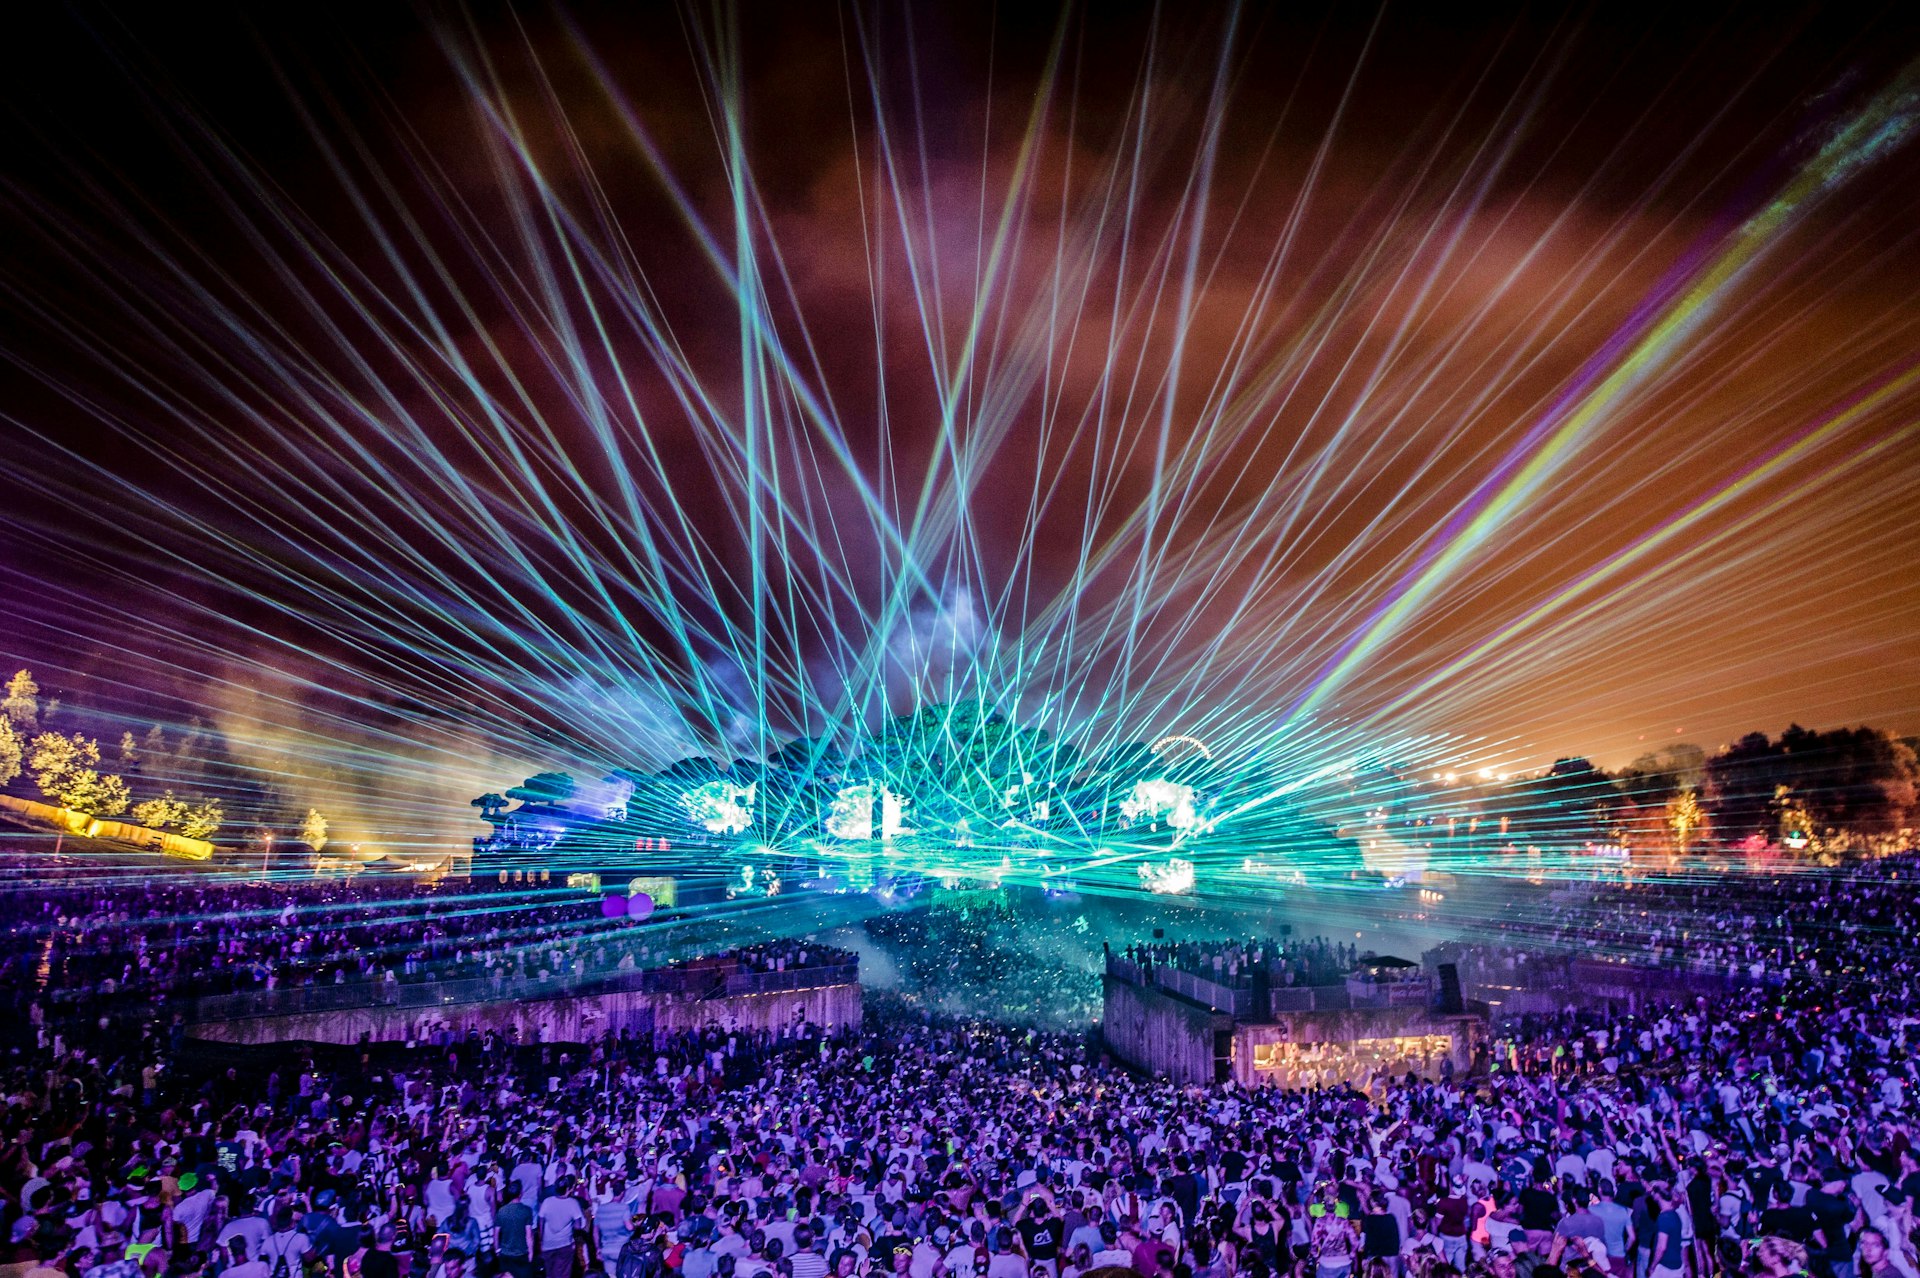 Lasers shoot from a stage into the sky at a music festival with a huge crowd